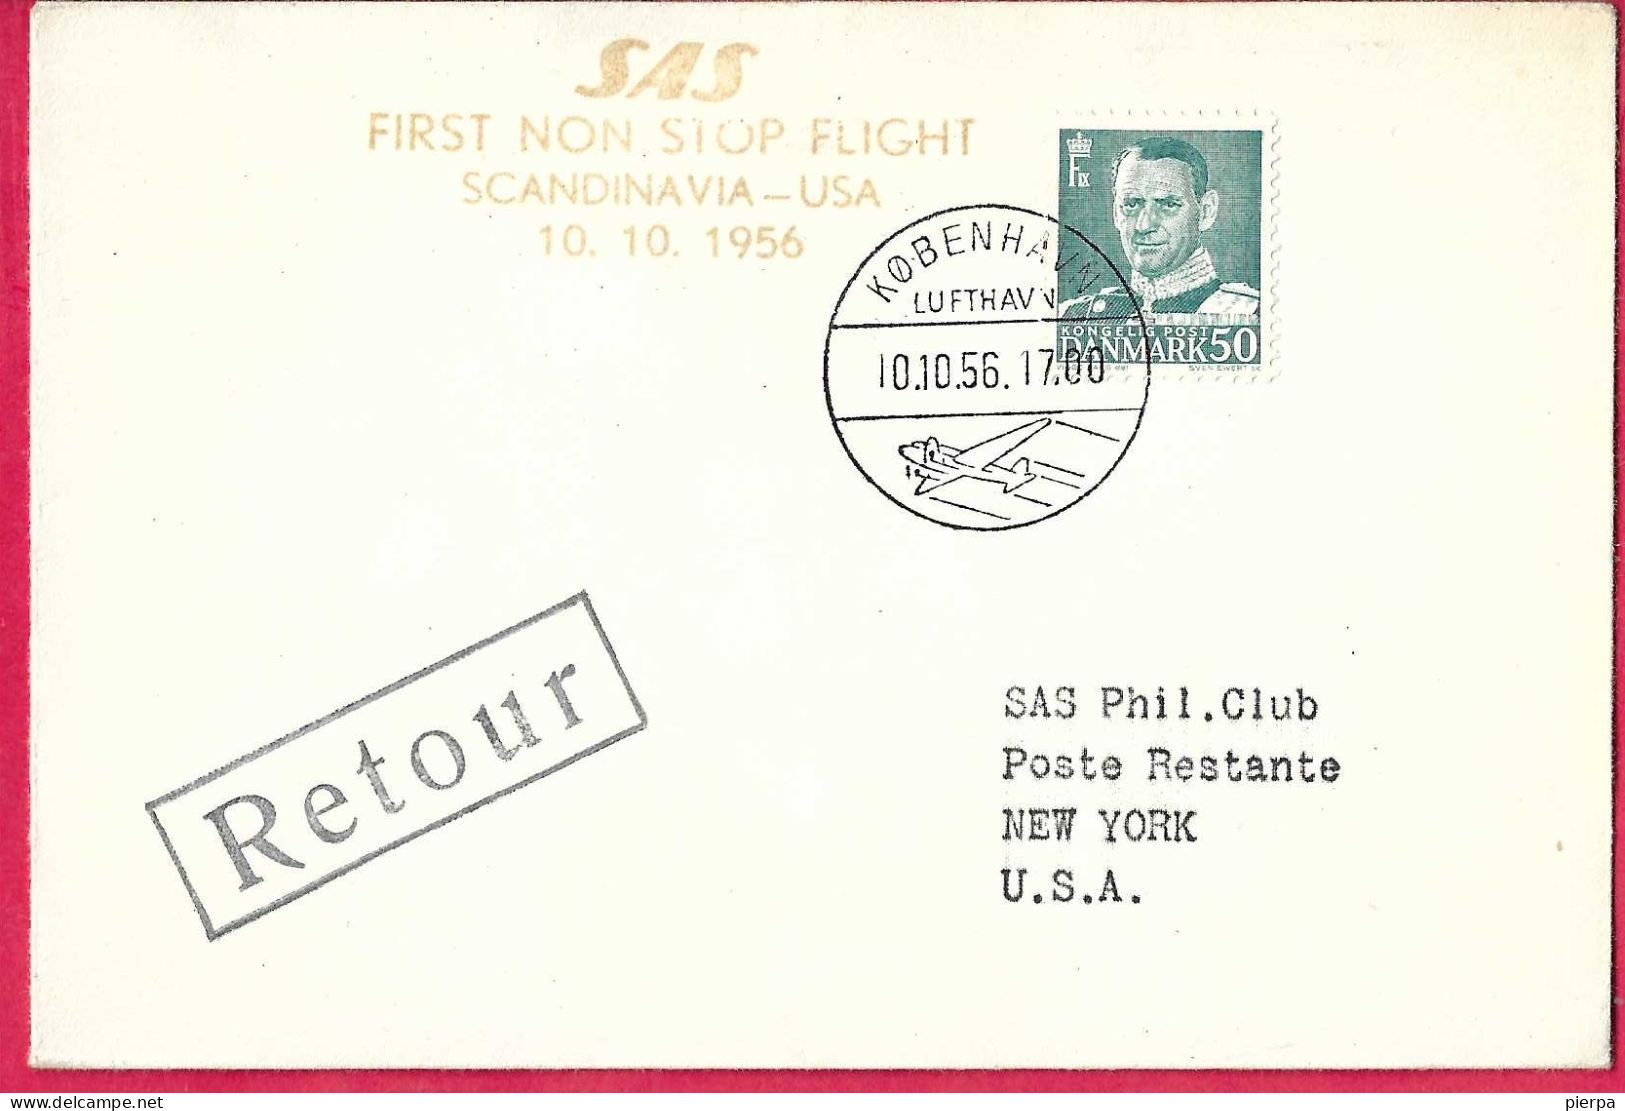 DANMARK - FIRST NON STOP FLIGHT SAS FROM KOBENHAVN TO NEW YORK *10.10.56* ON OFFICIAL COVER - Airmail